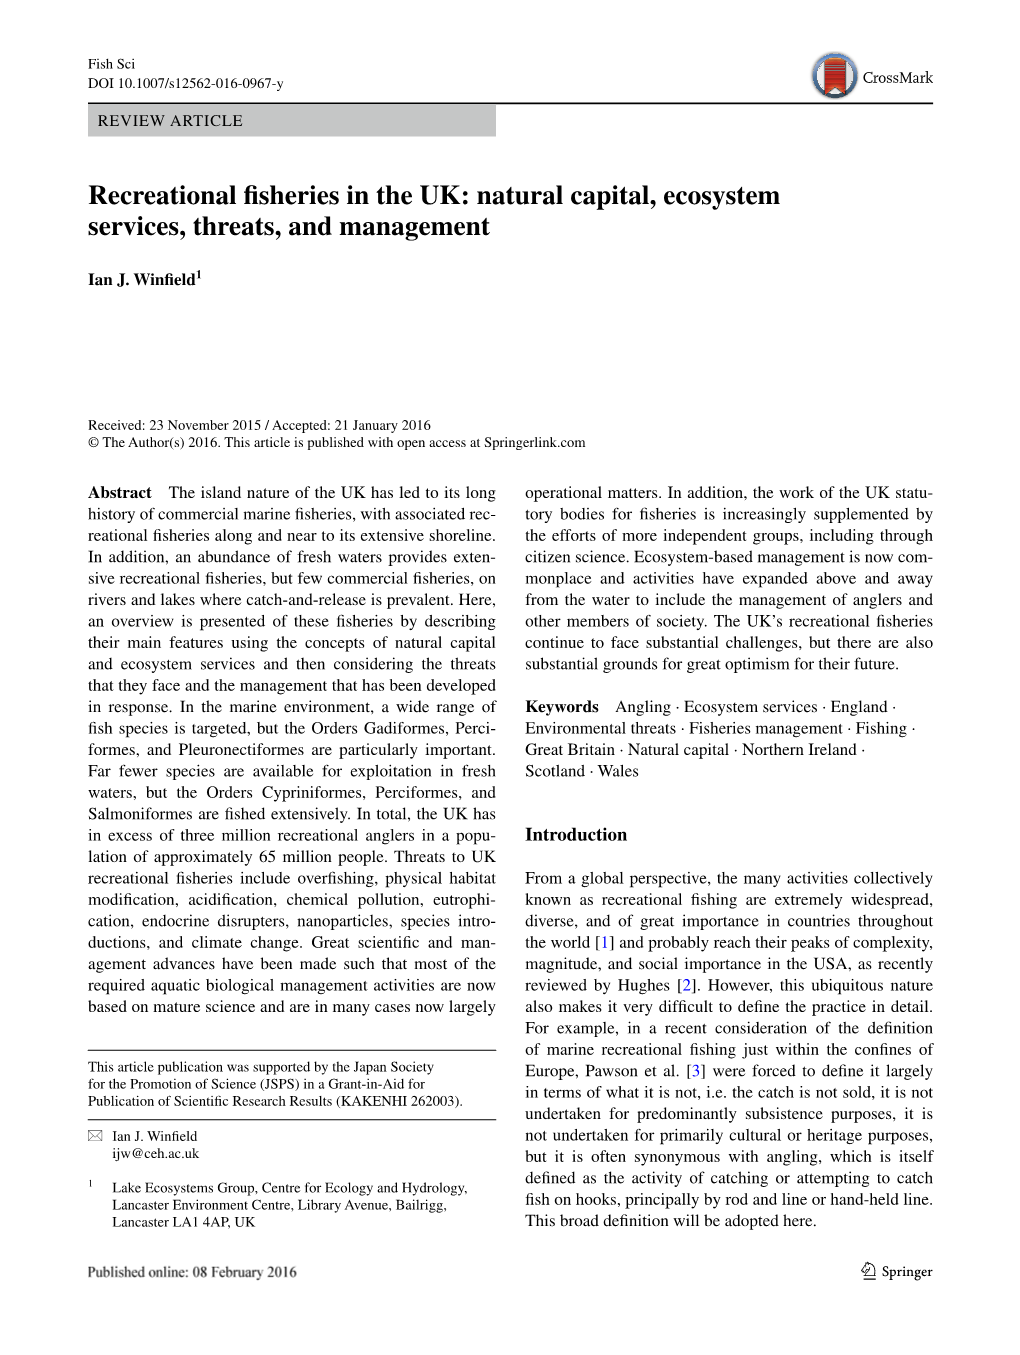 Recreational Fisheries in the UK: Natural Capital, Ecosystem Services, Threats, and Management